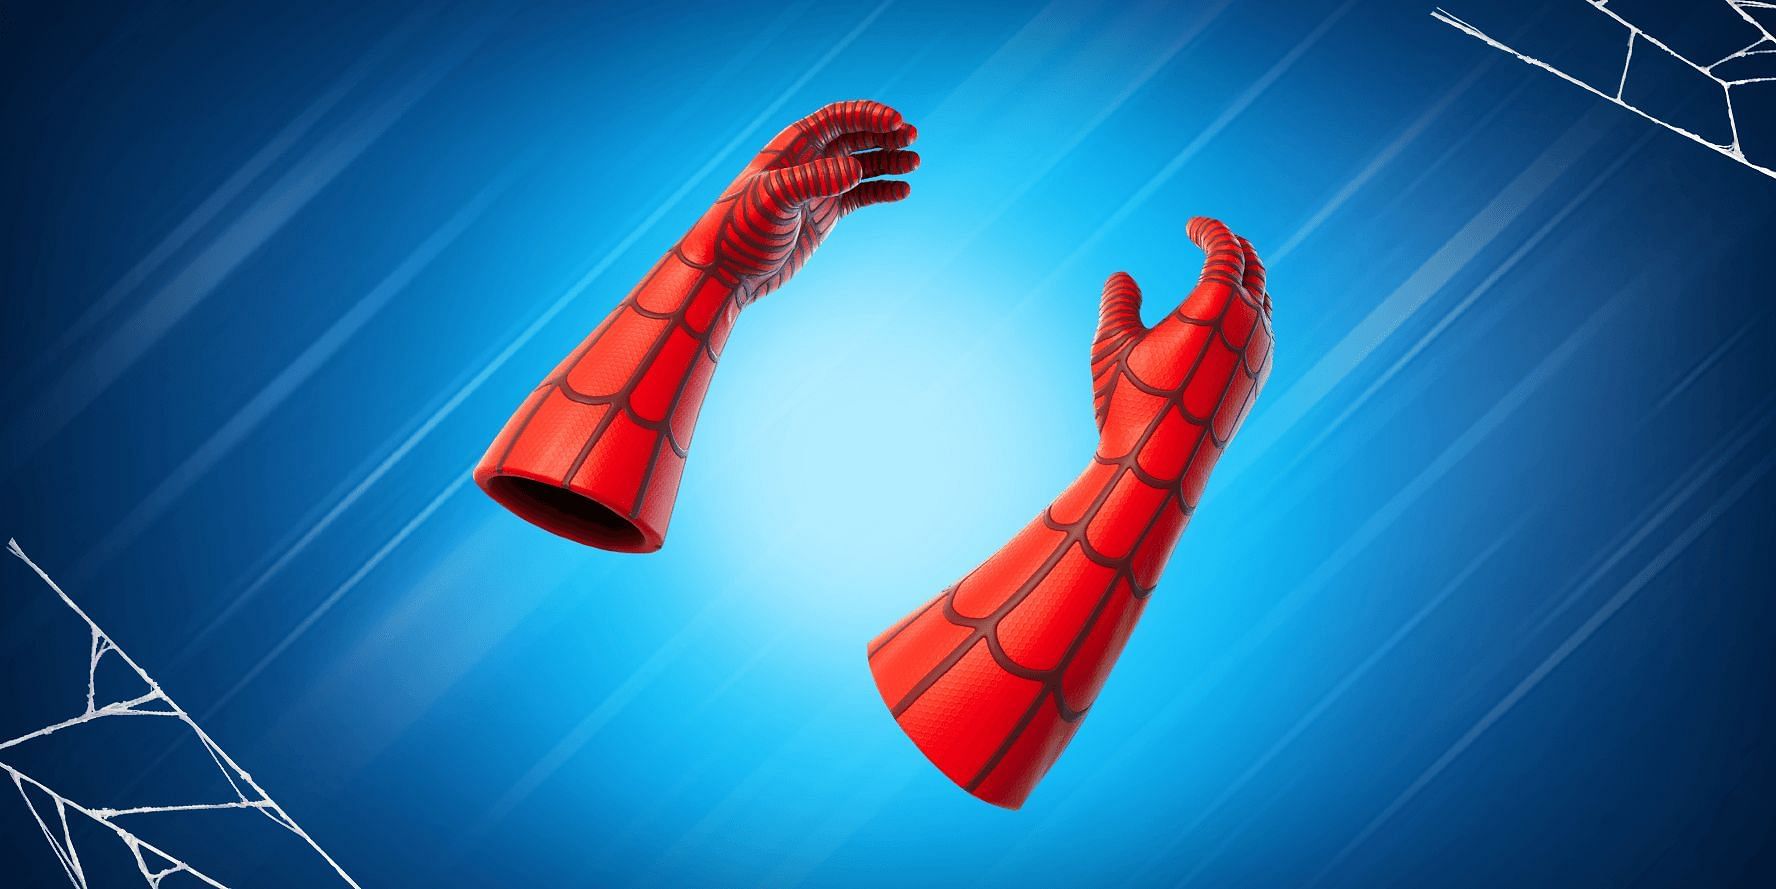 Spider-Man’s web-shooters are presently accessible in Fortnite